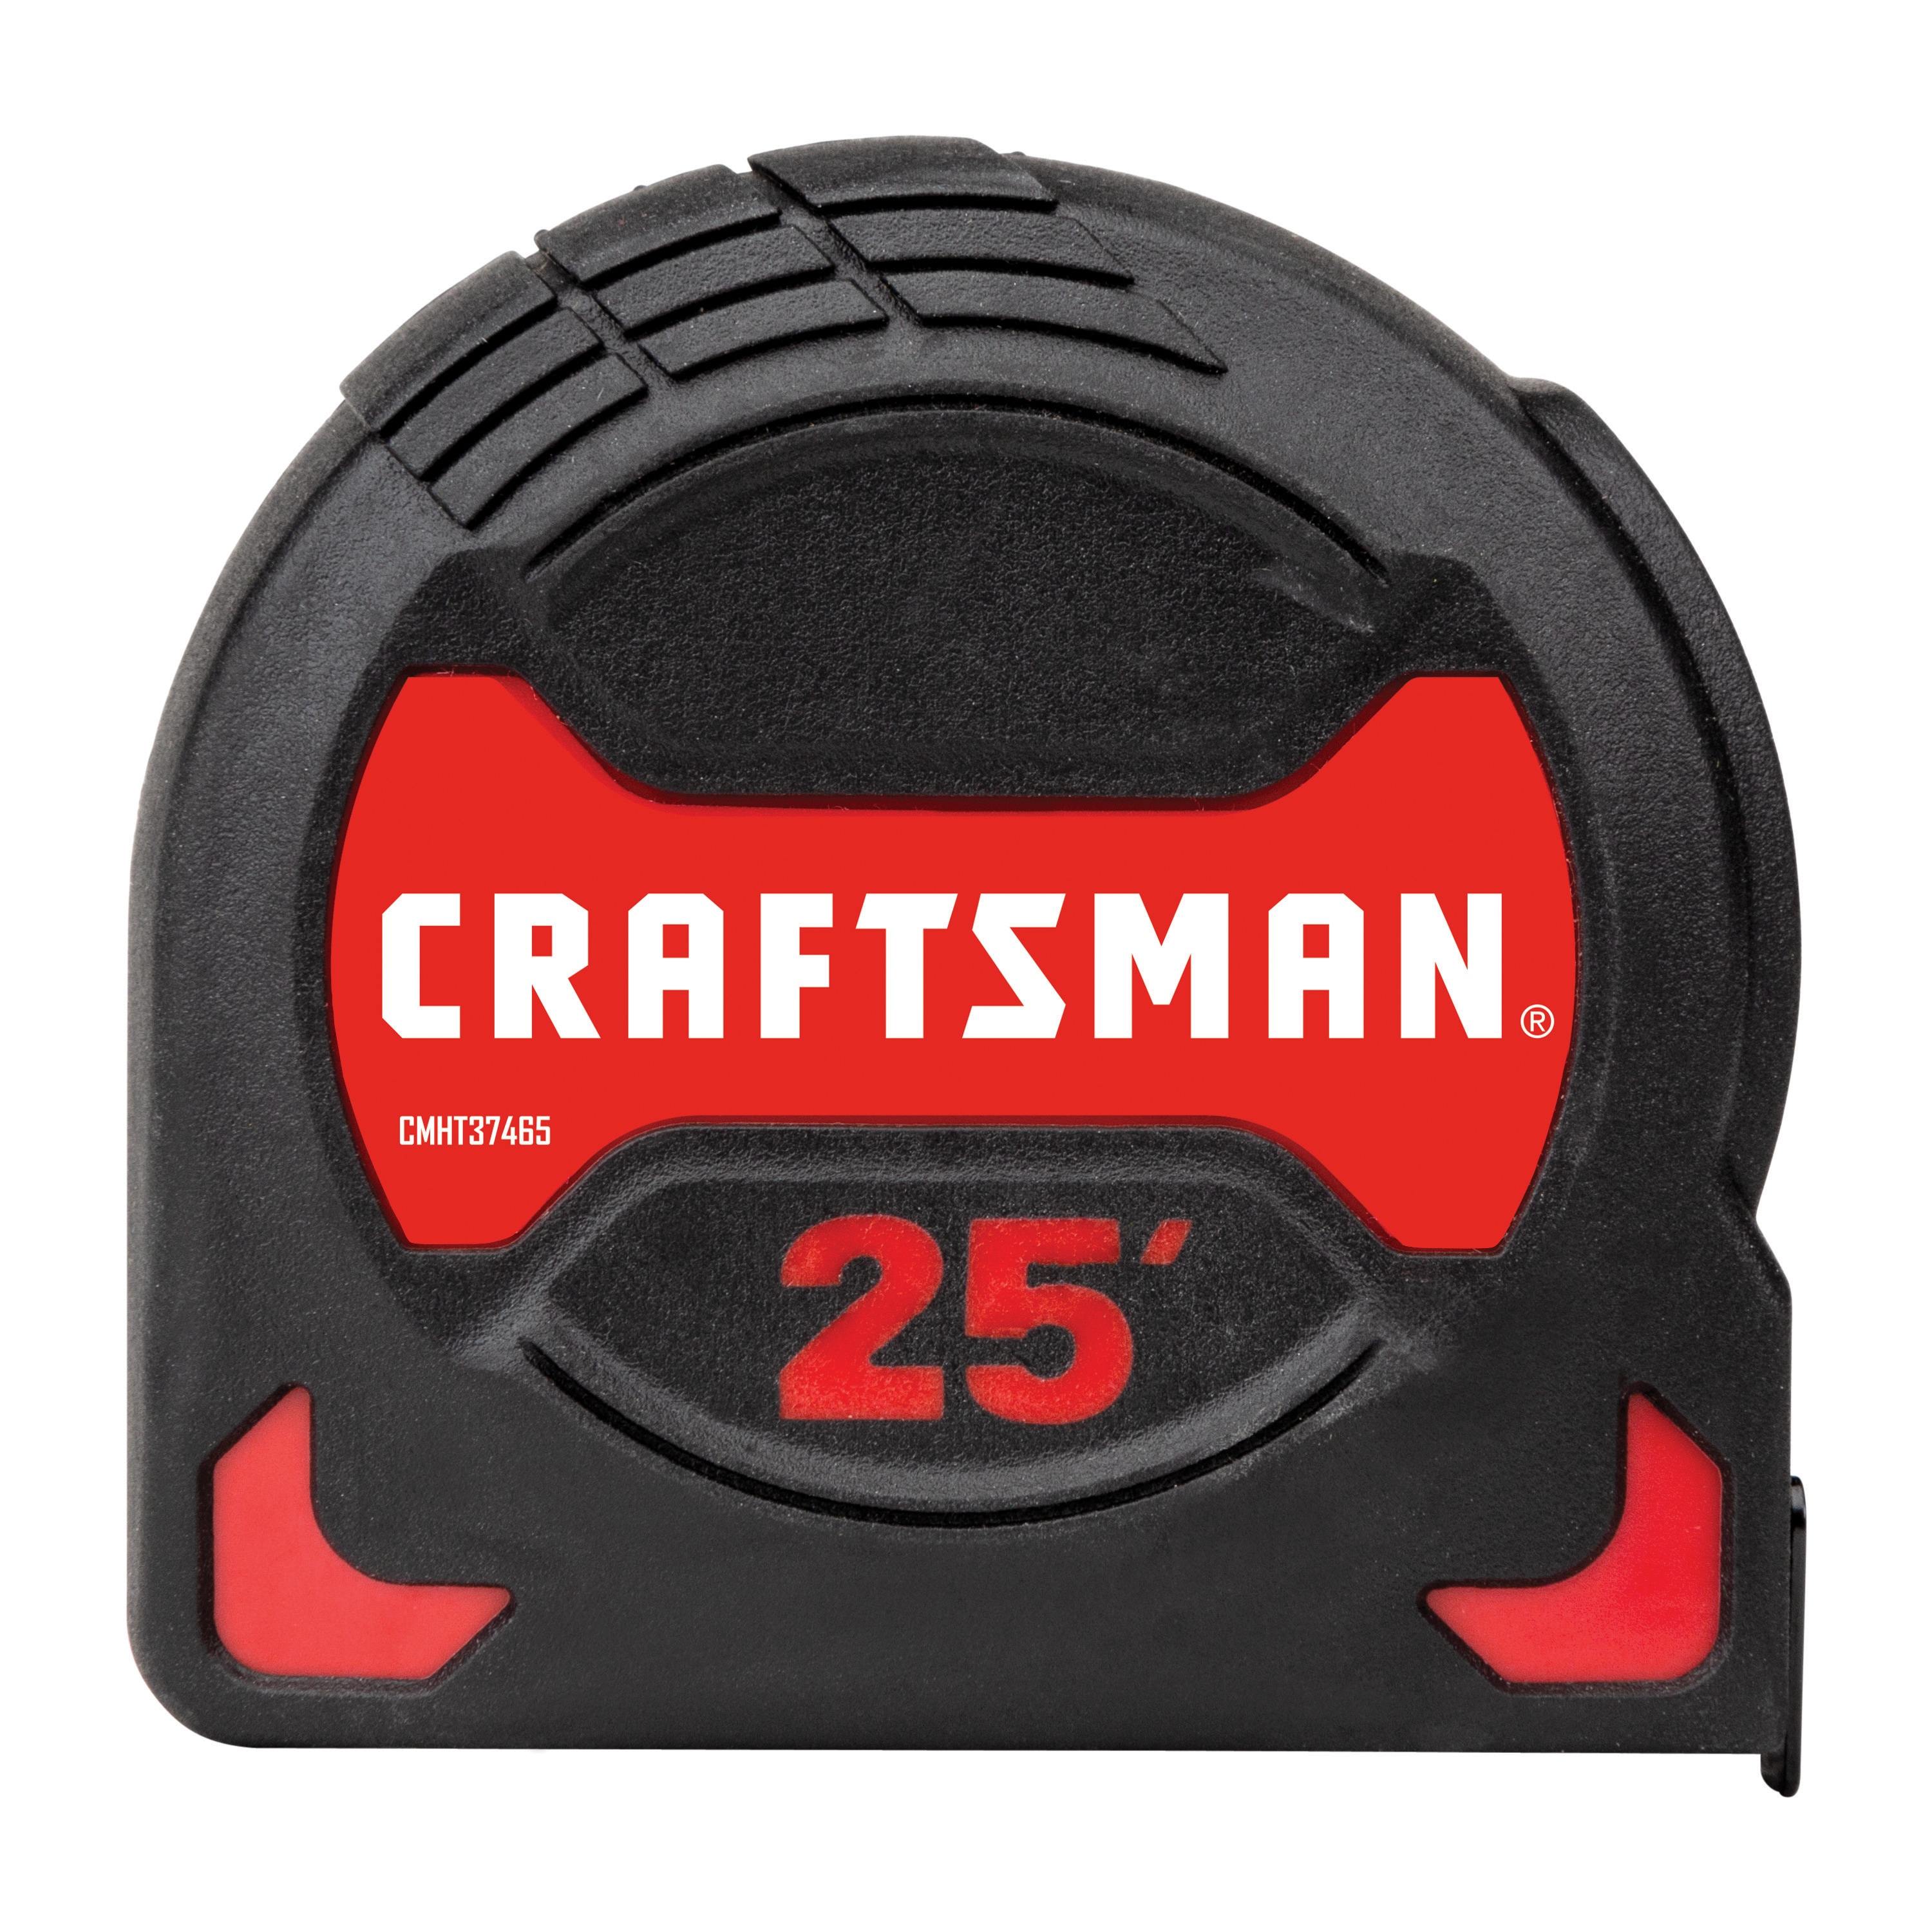 CRAFTSMAN EasyGrip 25-ft Tape Measure in the Tape Measures